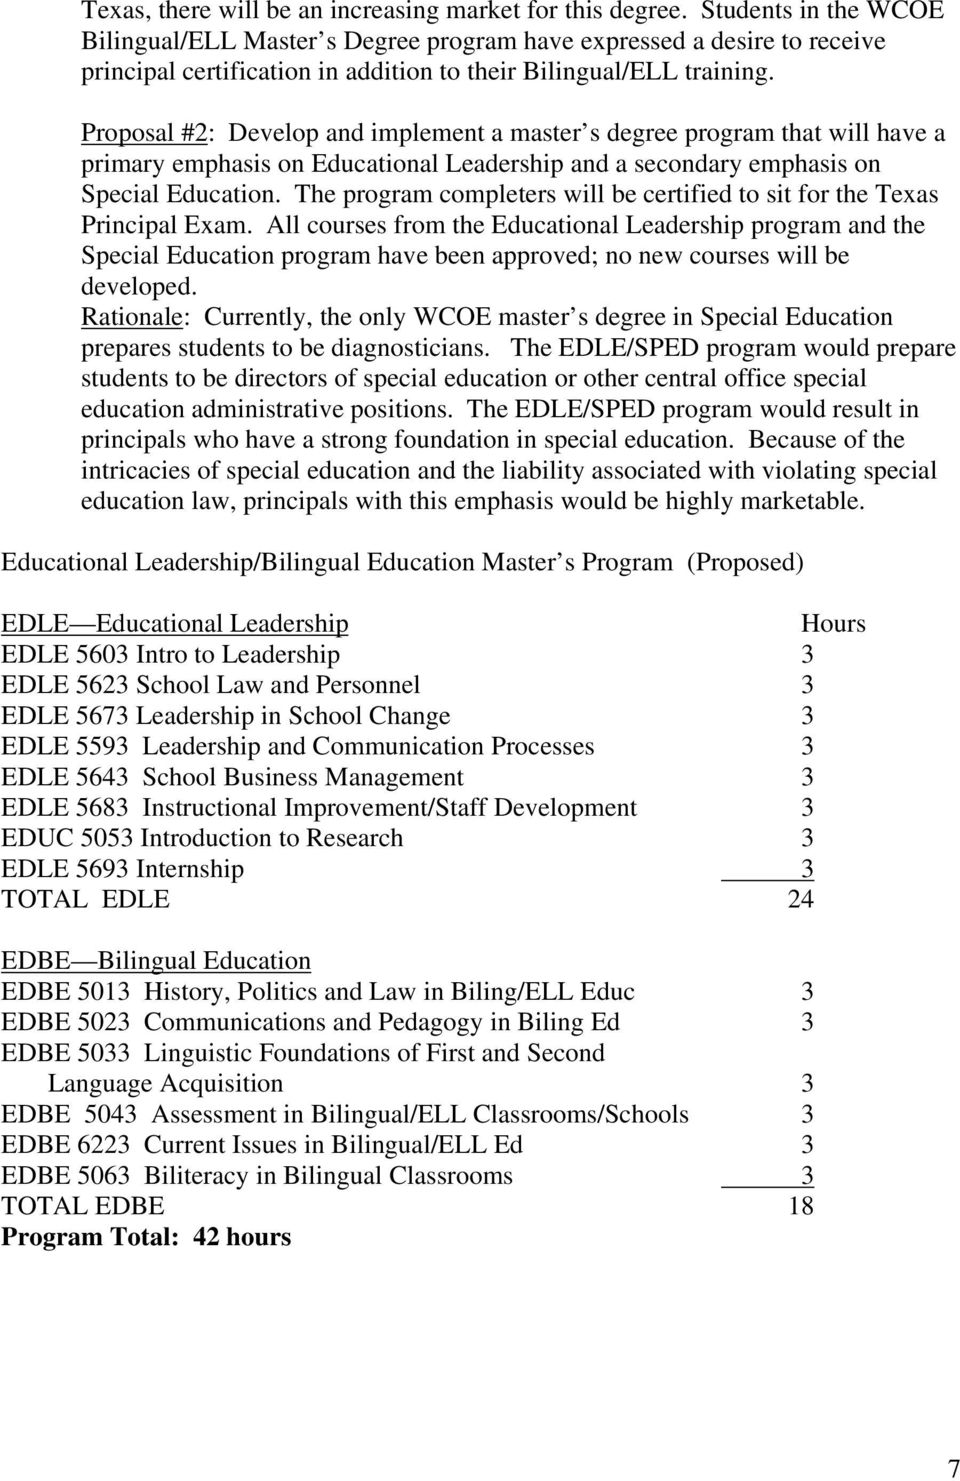 Proposal #2: Develop and implement a master s degree program that will have a primary emphasis on Educational Leadership and a secondary emphasis on Special Education.